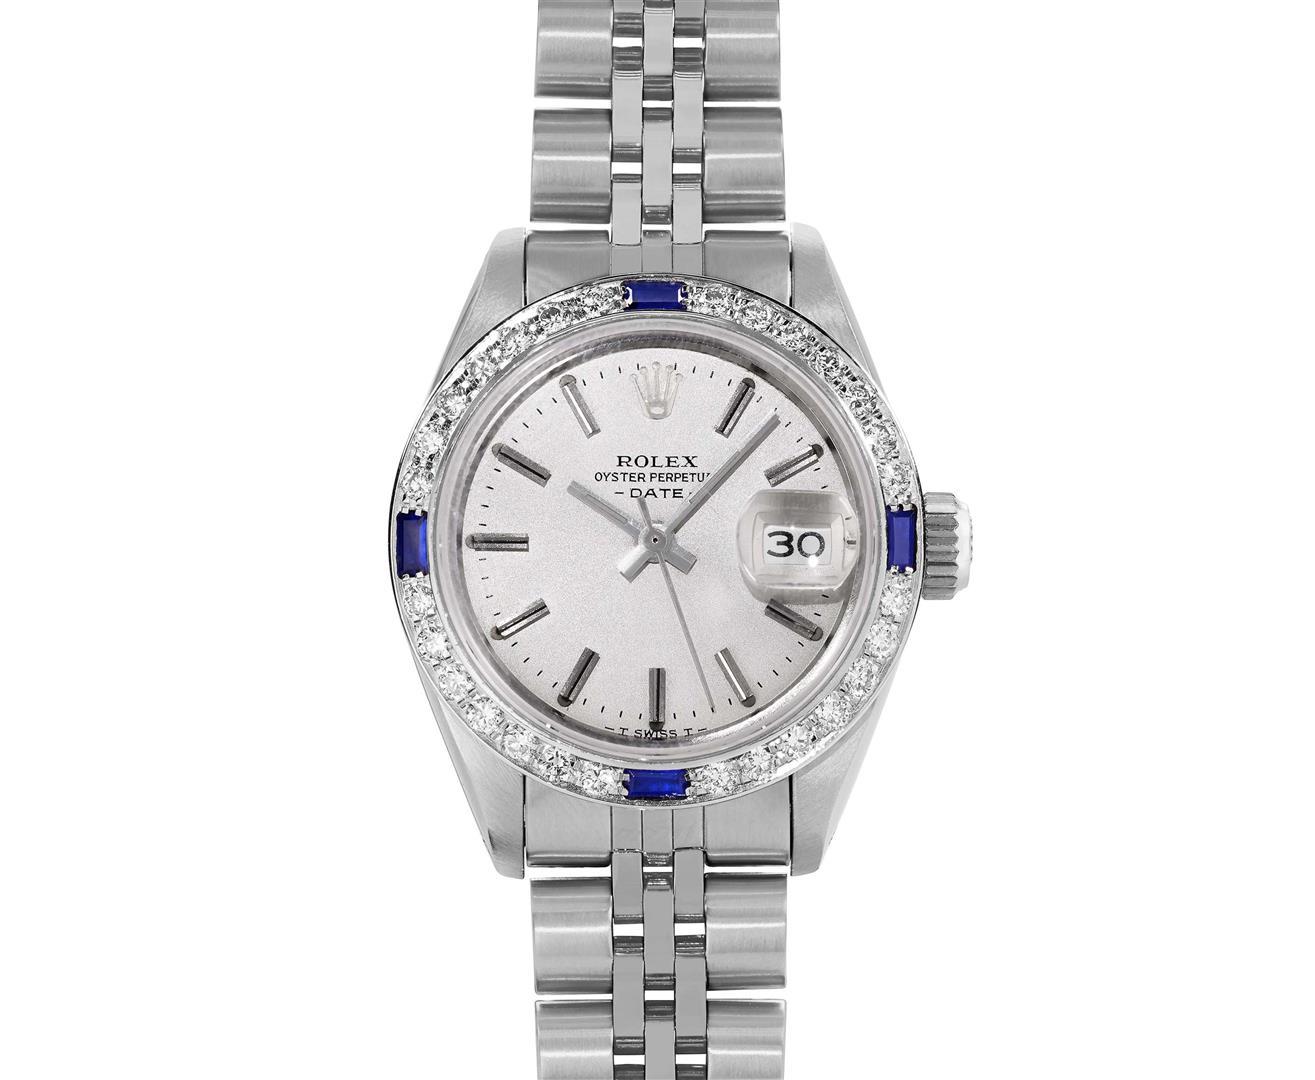 Rolex Ladies Stainless Steel Silver Index Dial Diamond And Sapphire Date Watch